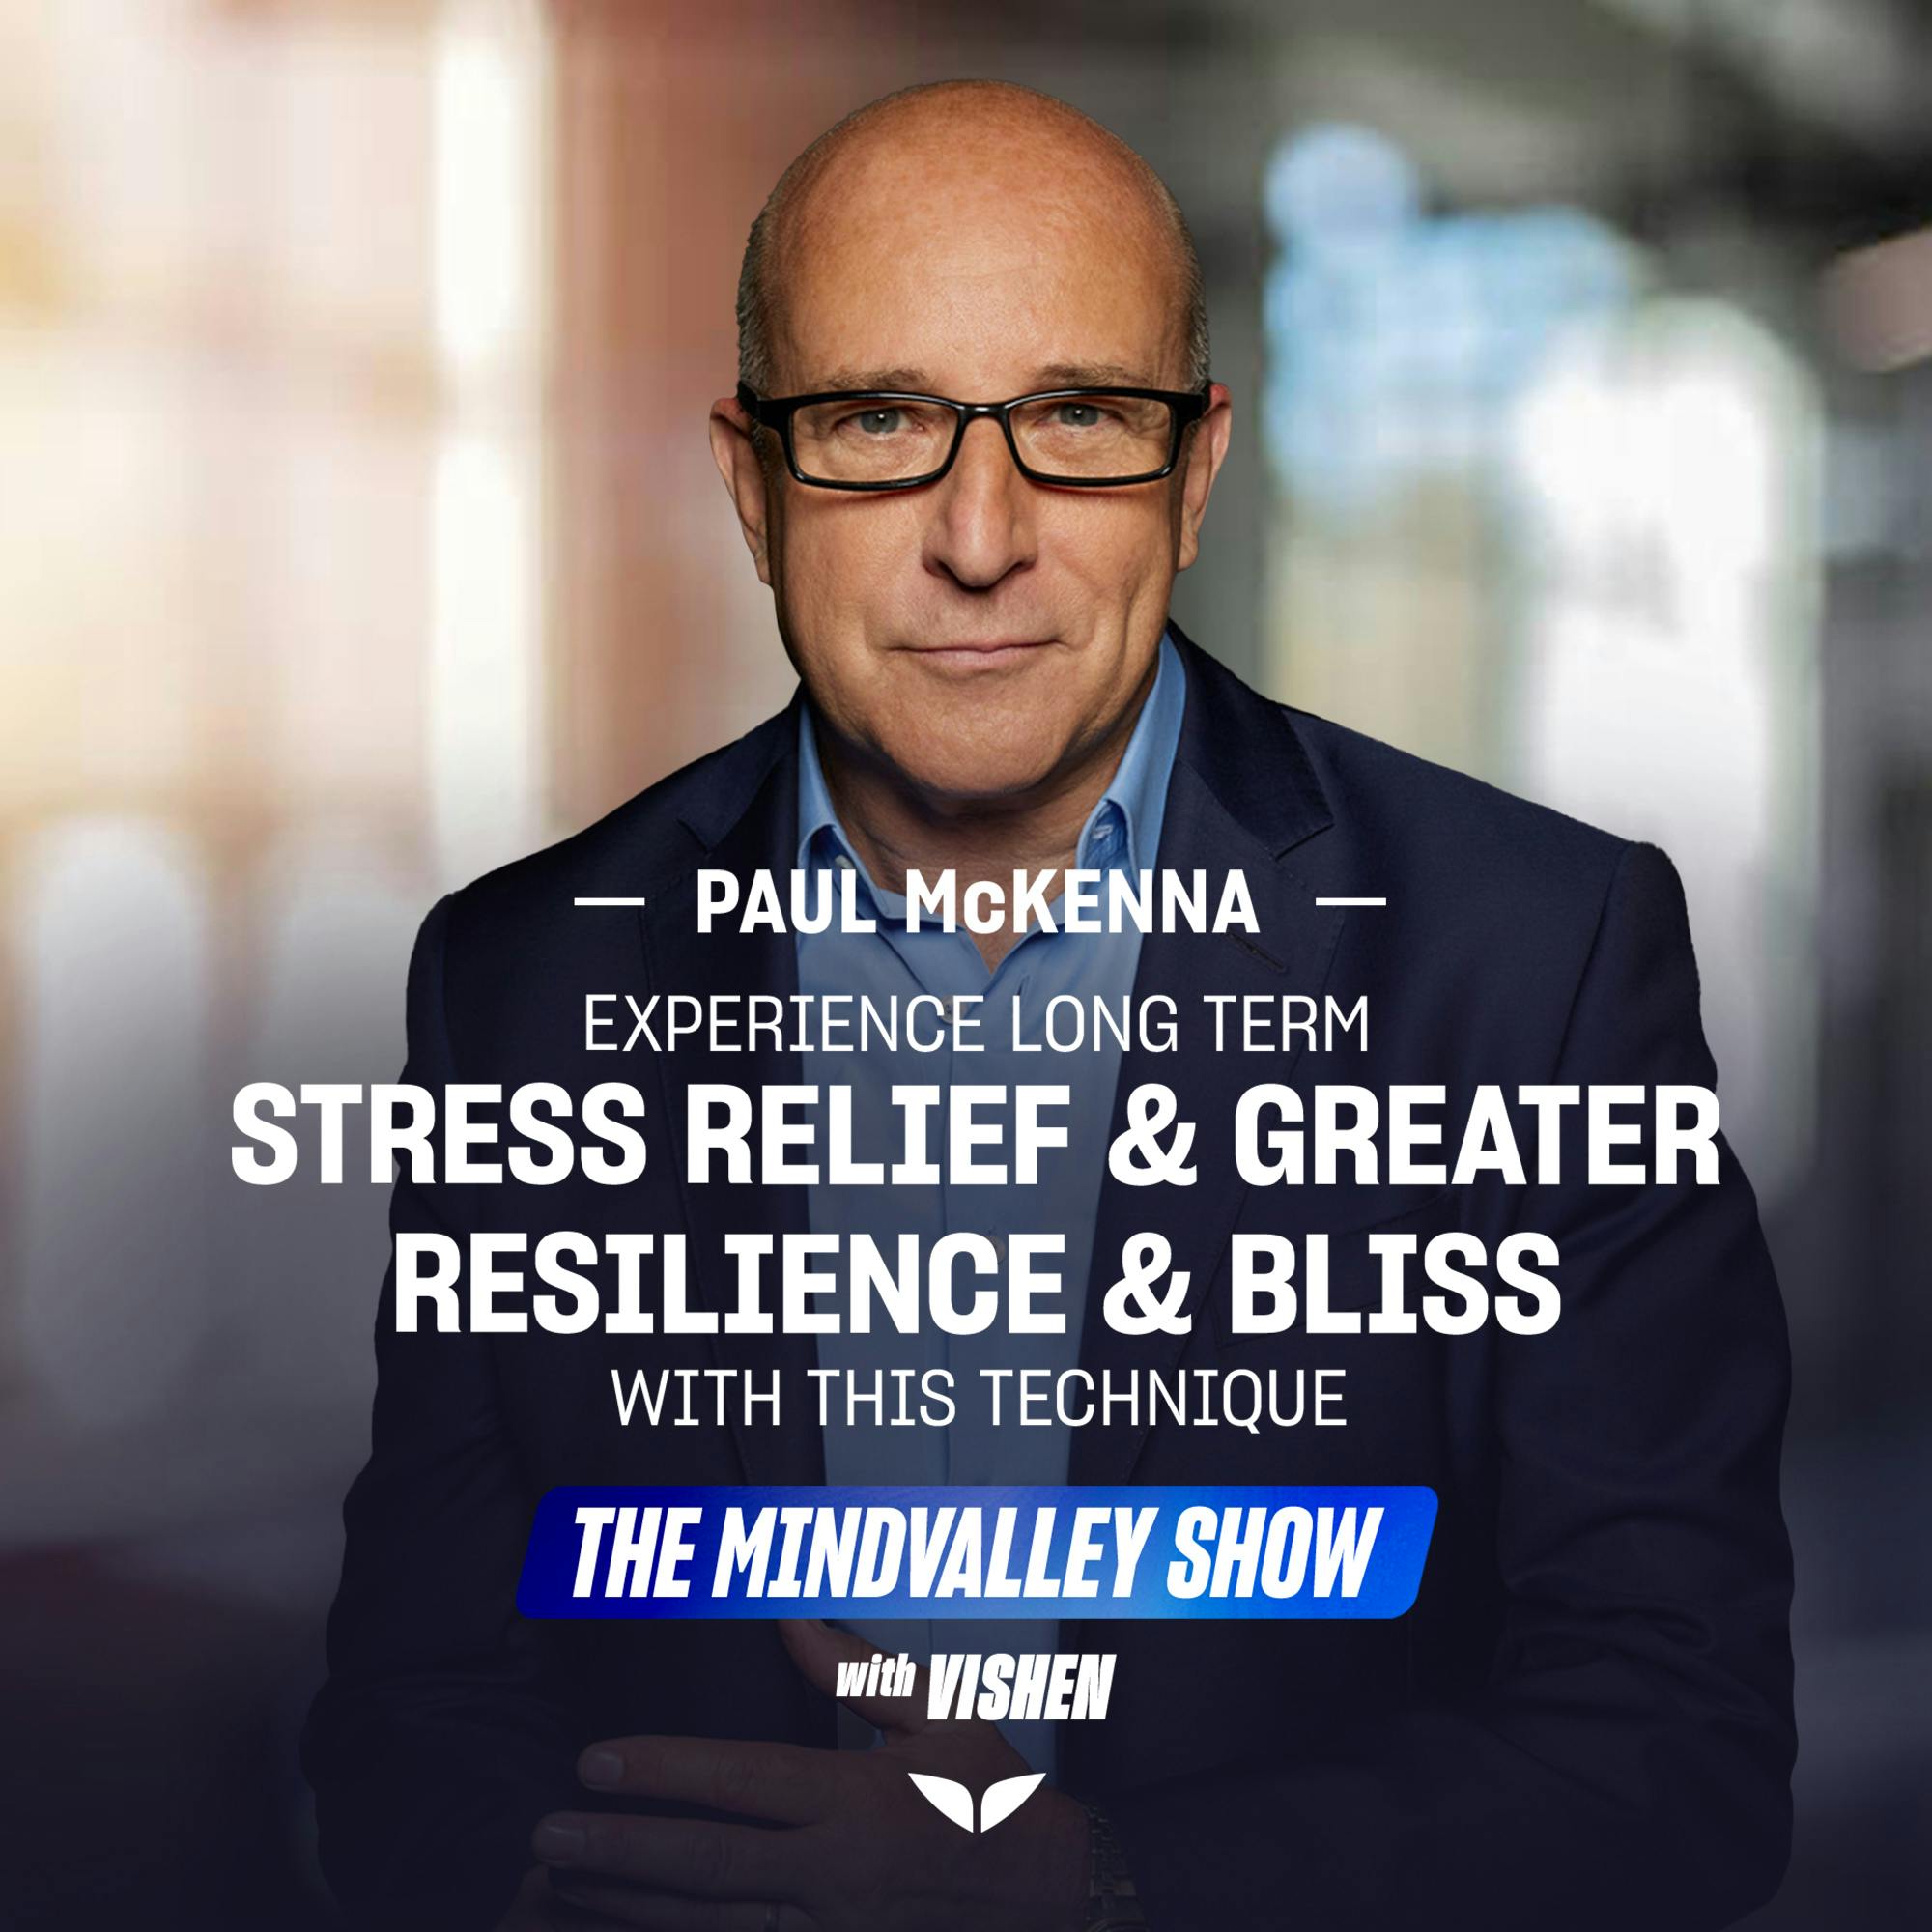 Experience Long Term Stress Relief & Greater Resilience & Bliss with this Technique | Paul McKenna